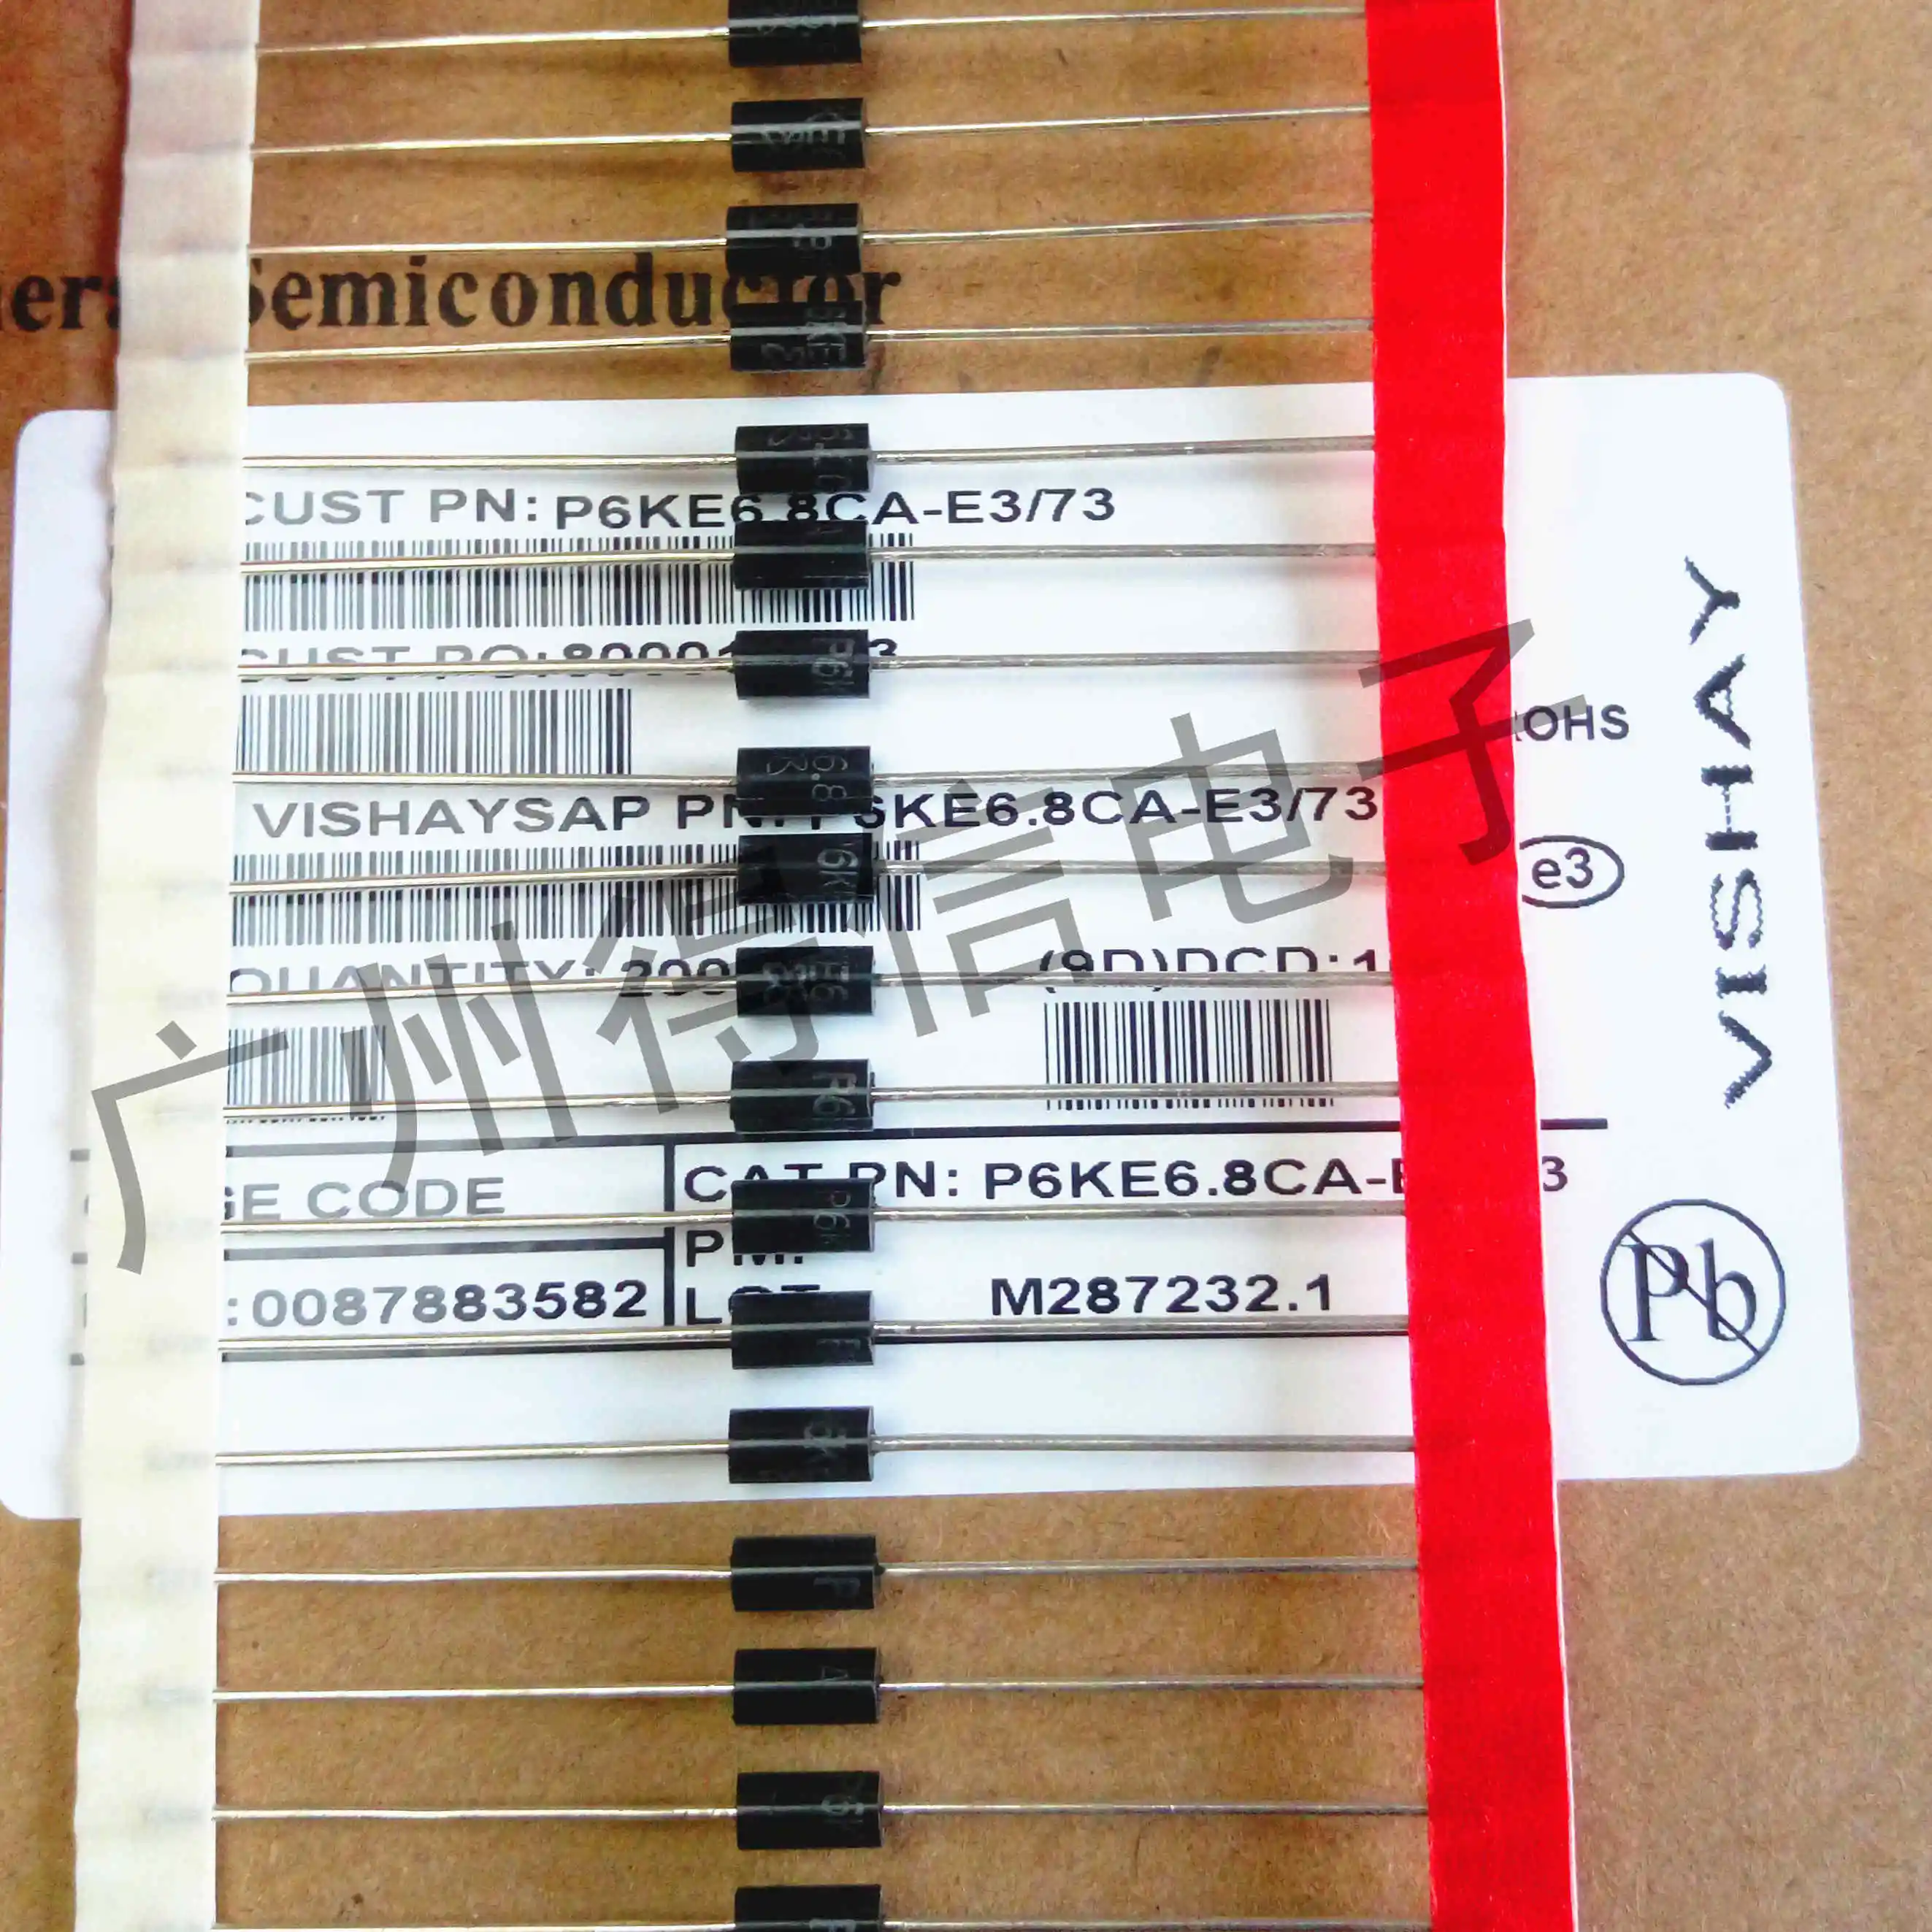 100pcs/lot New VISHAY P6KE DO-15 A unidirectional diode TVS tube plug-in taping transient suppression diode free shipping 1 100pcs sm6t18ca bidirectional 18v tvs transient diode silkscreen me package smb smd brand new good quality free shipping